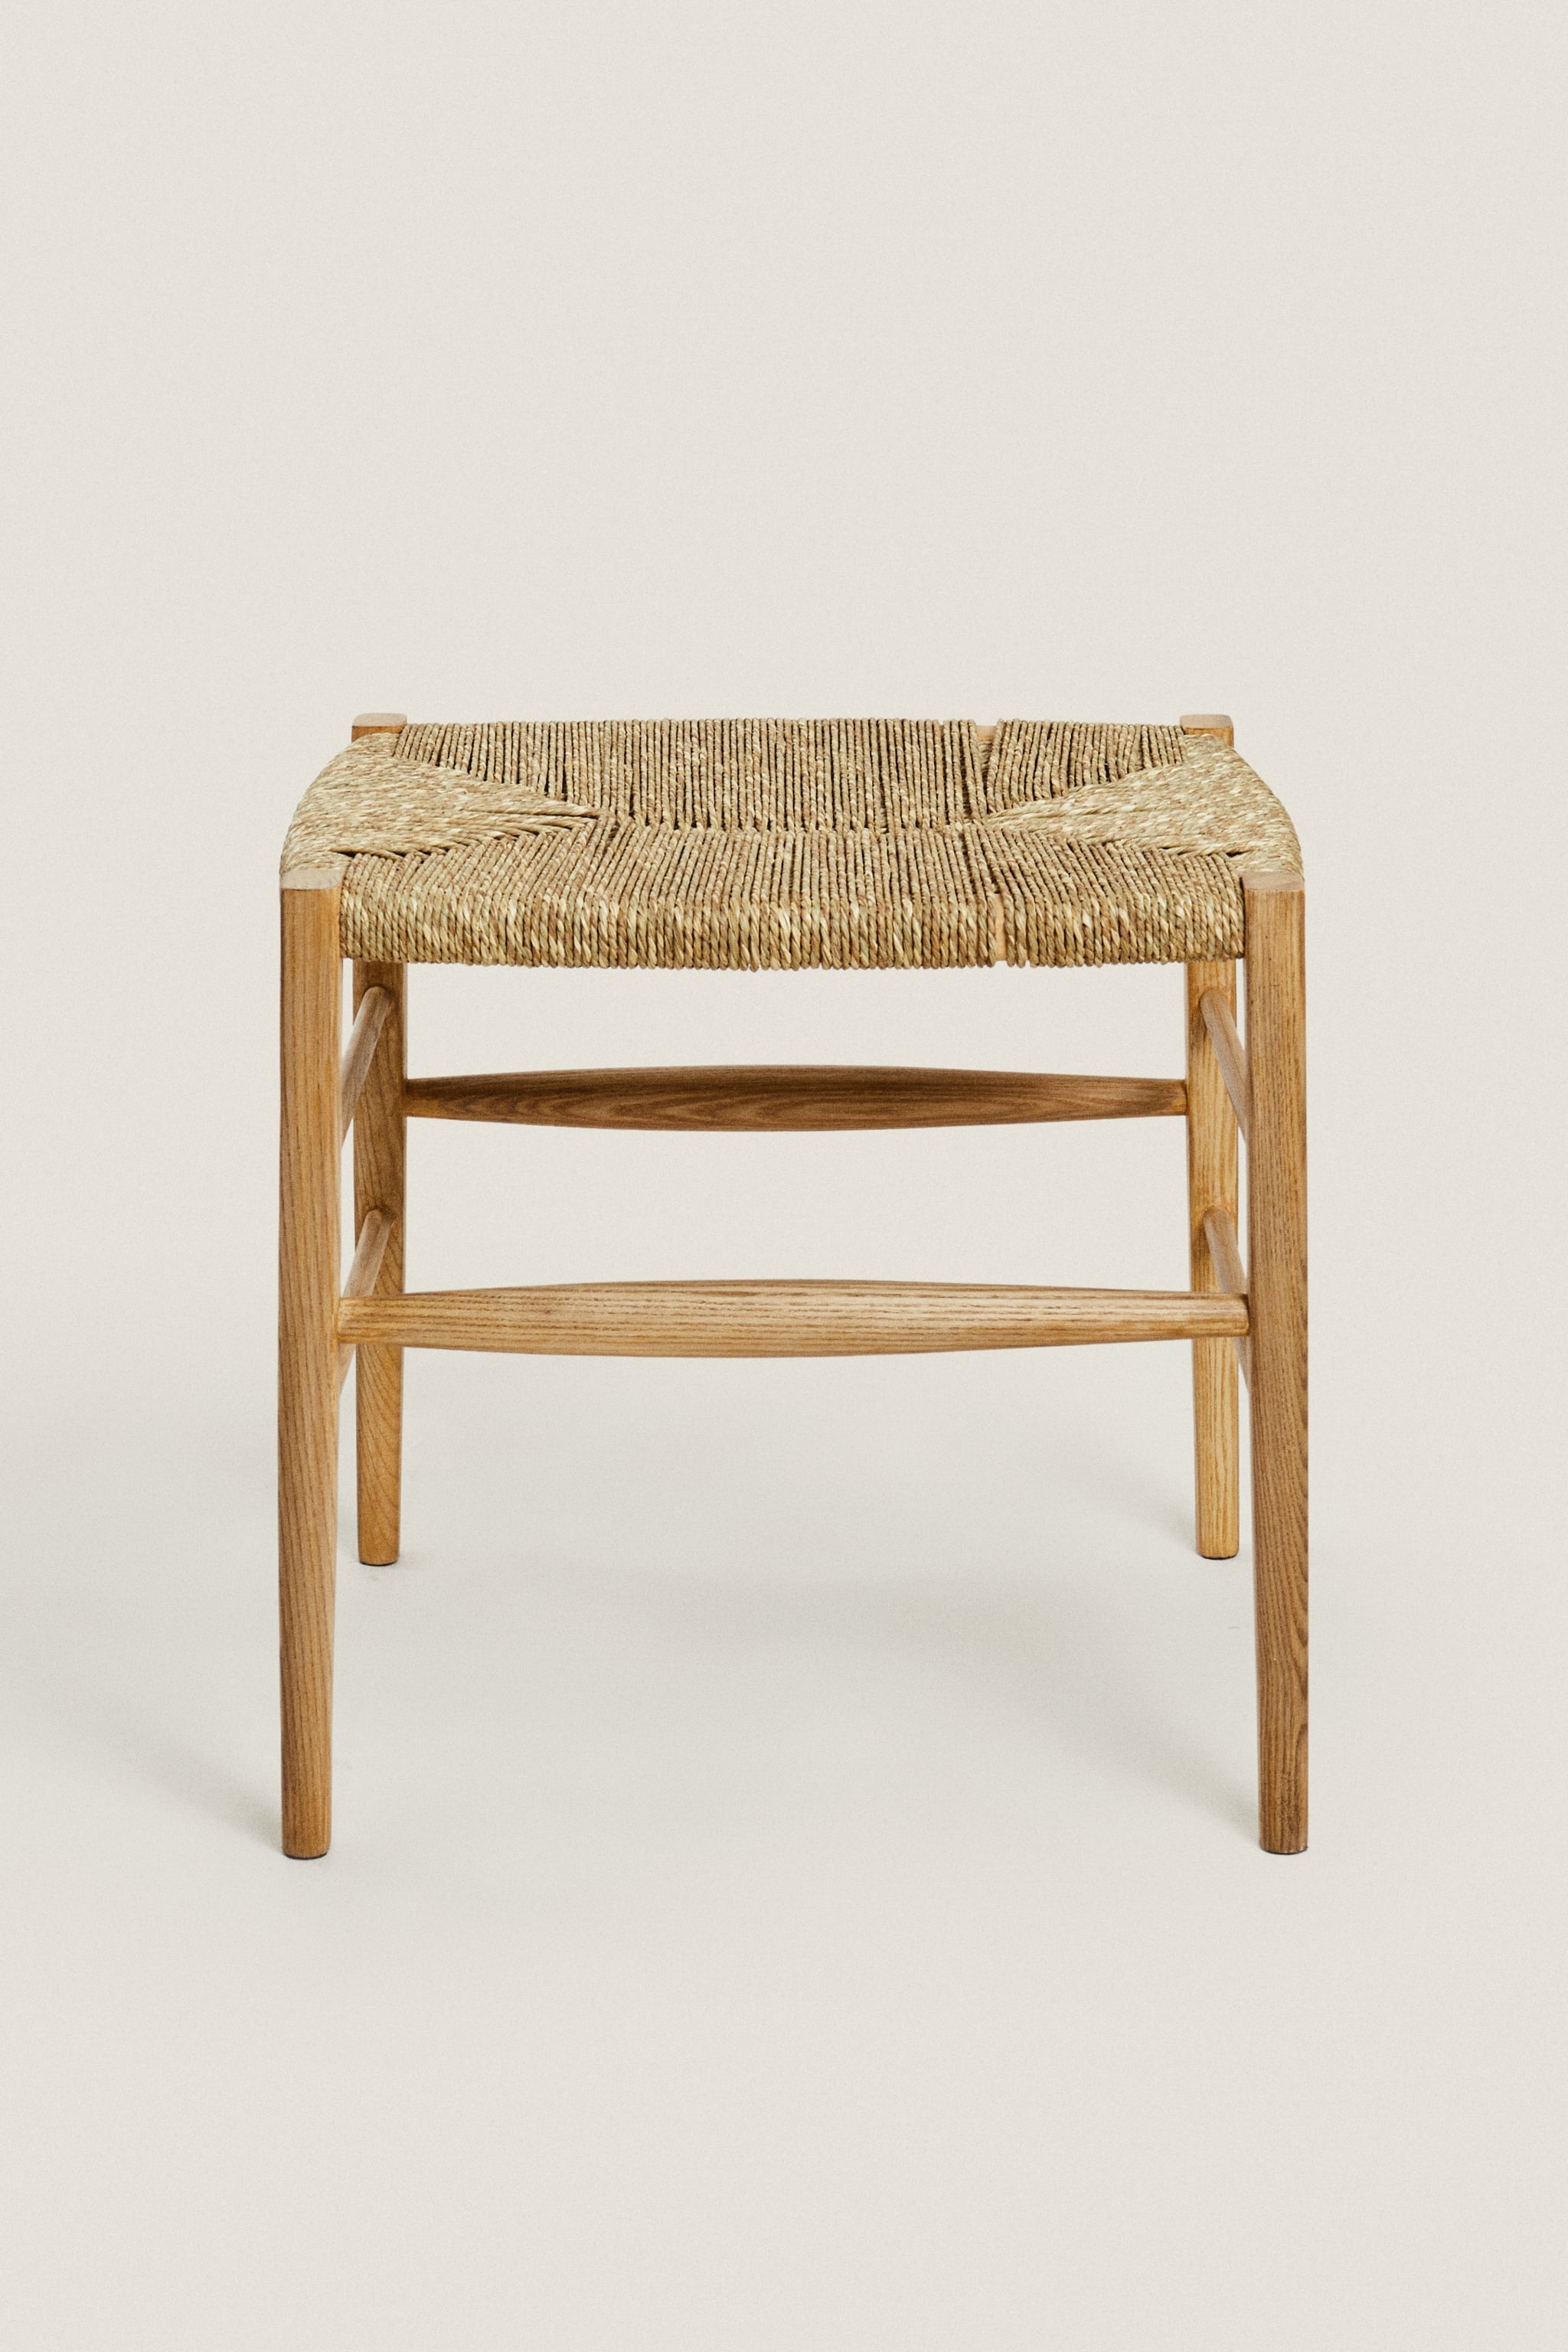 ASH AND SEAGRASS BENCH